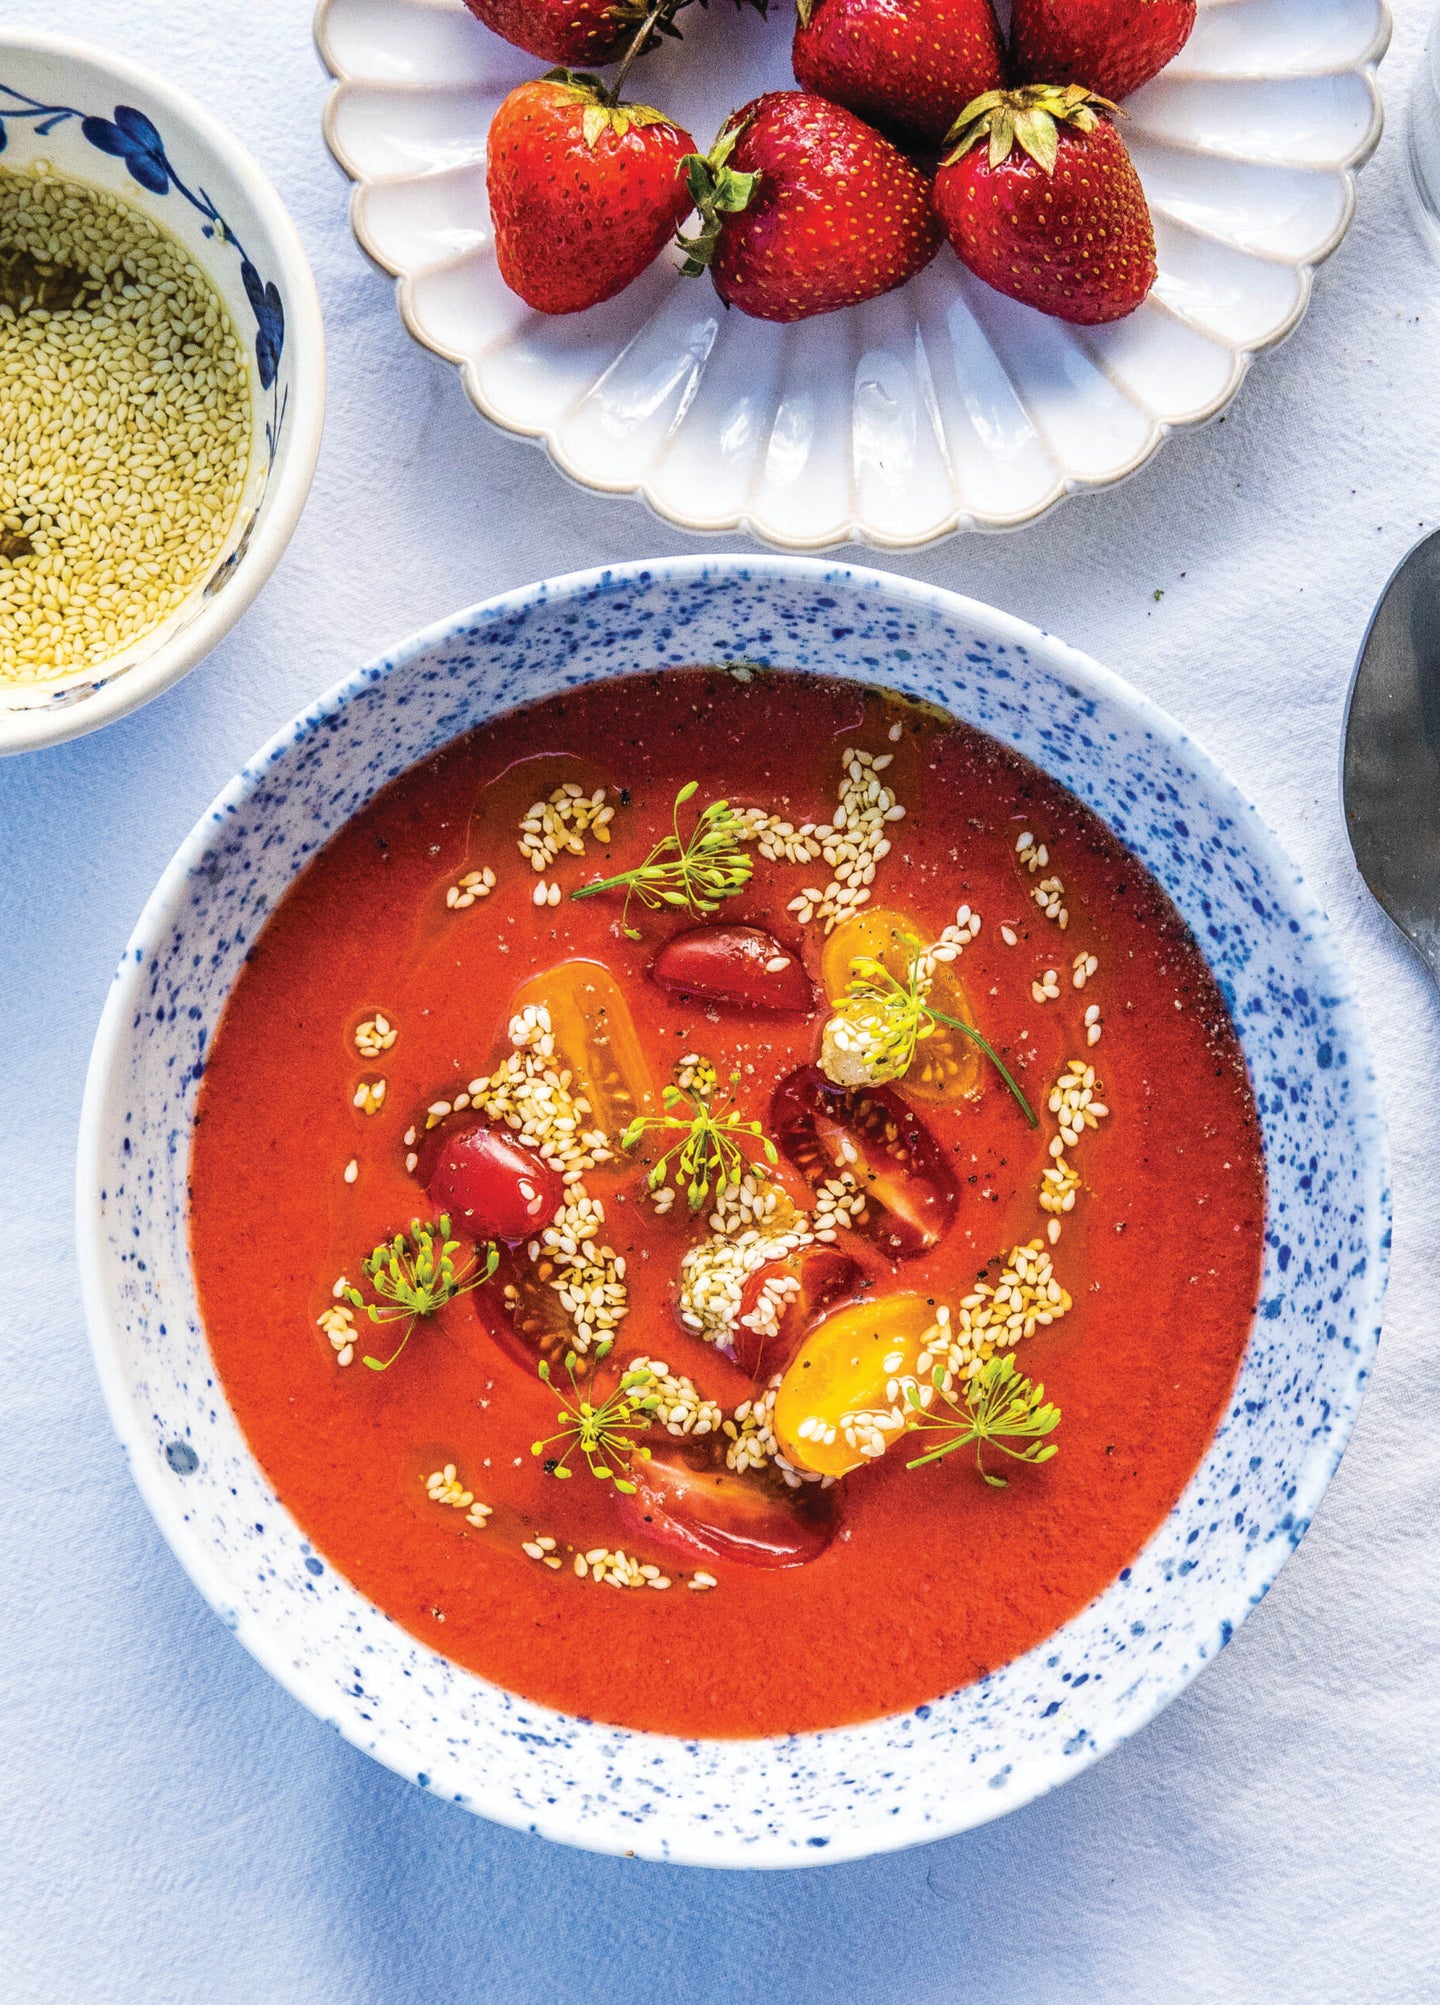 Chilled Tomato-Strawberry Soup